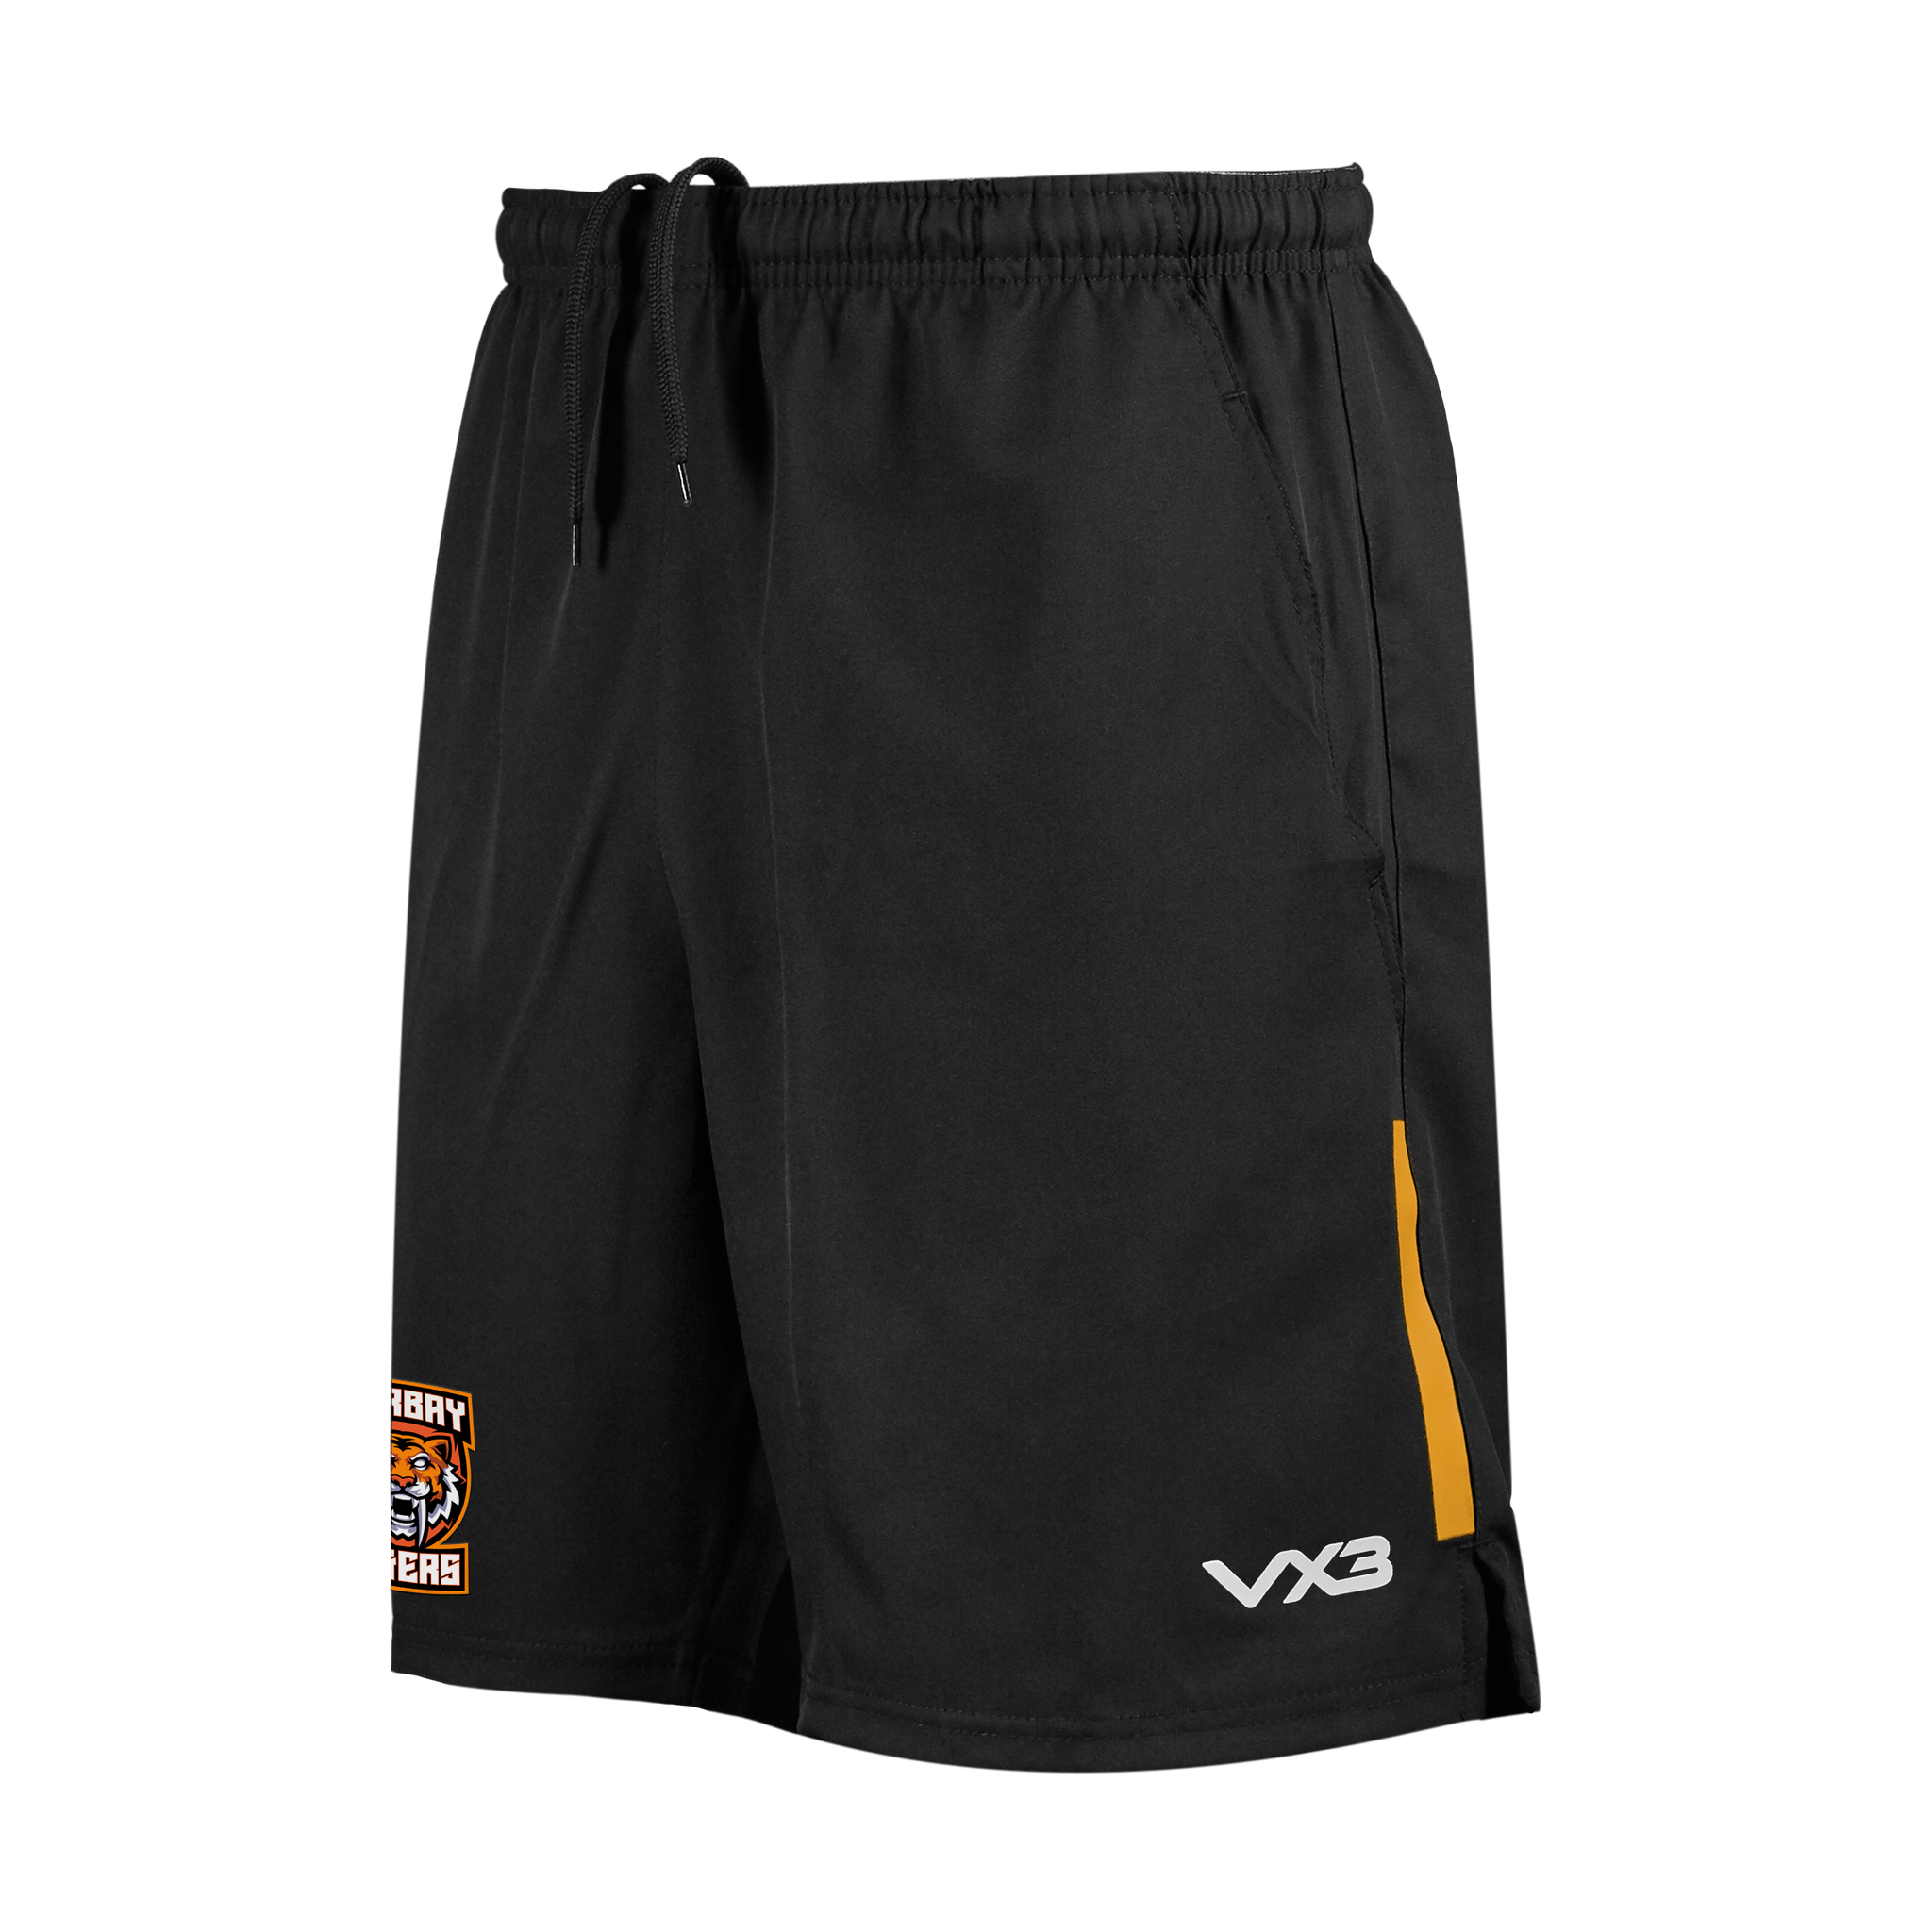 Torbay Tigers Fortis Youth Travel Shorts